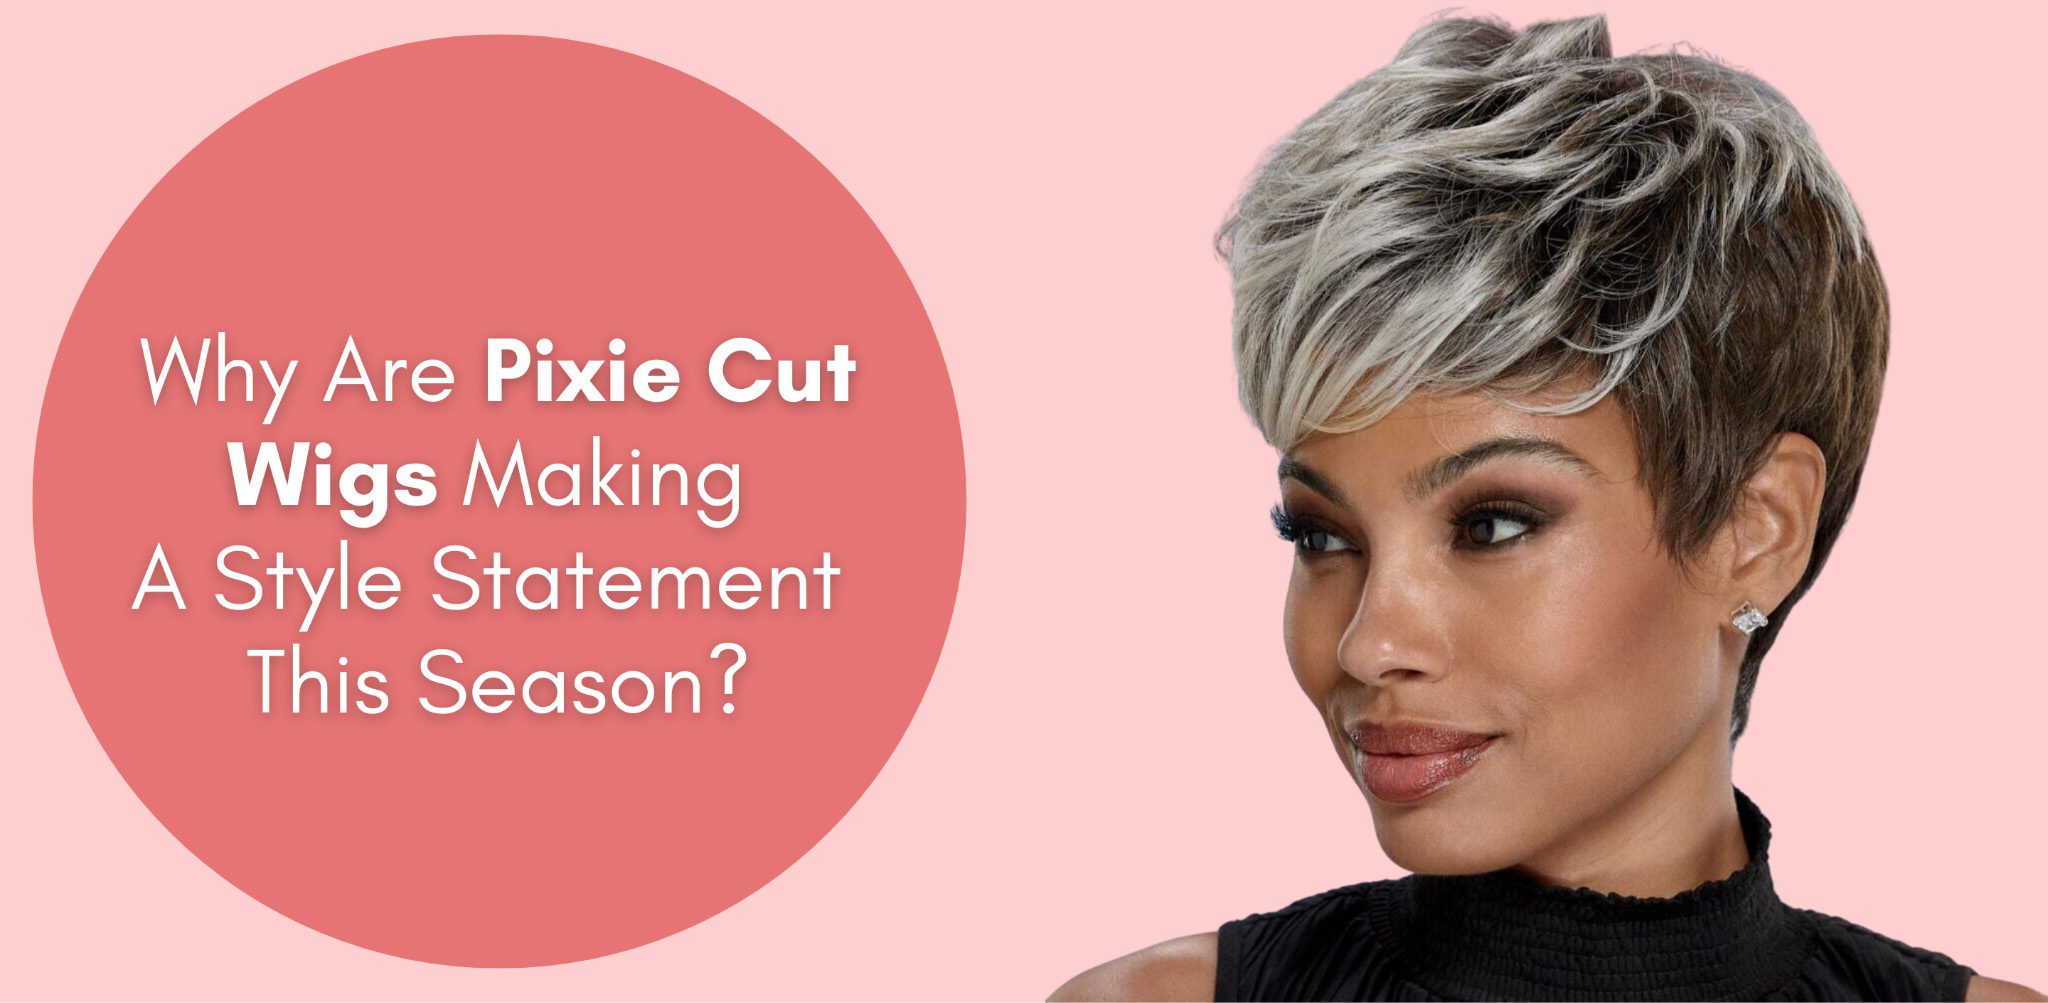 Why Are Pixie Cut Wigs Making A Style Statement This Season?